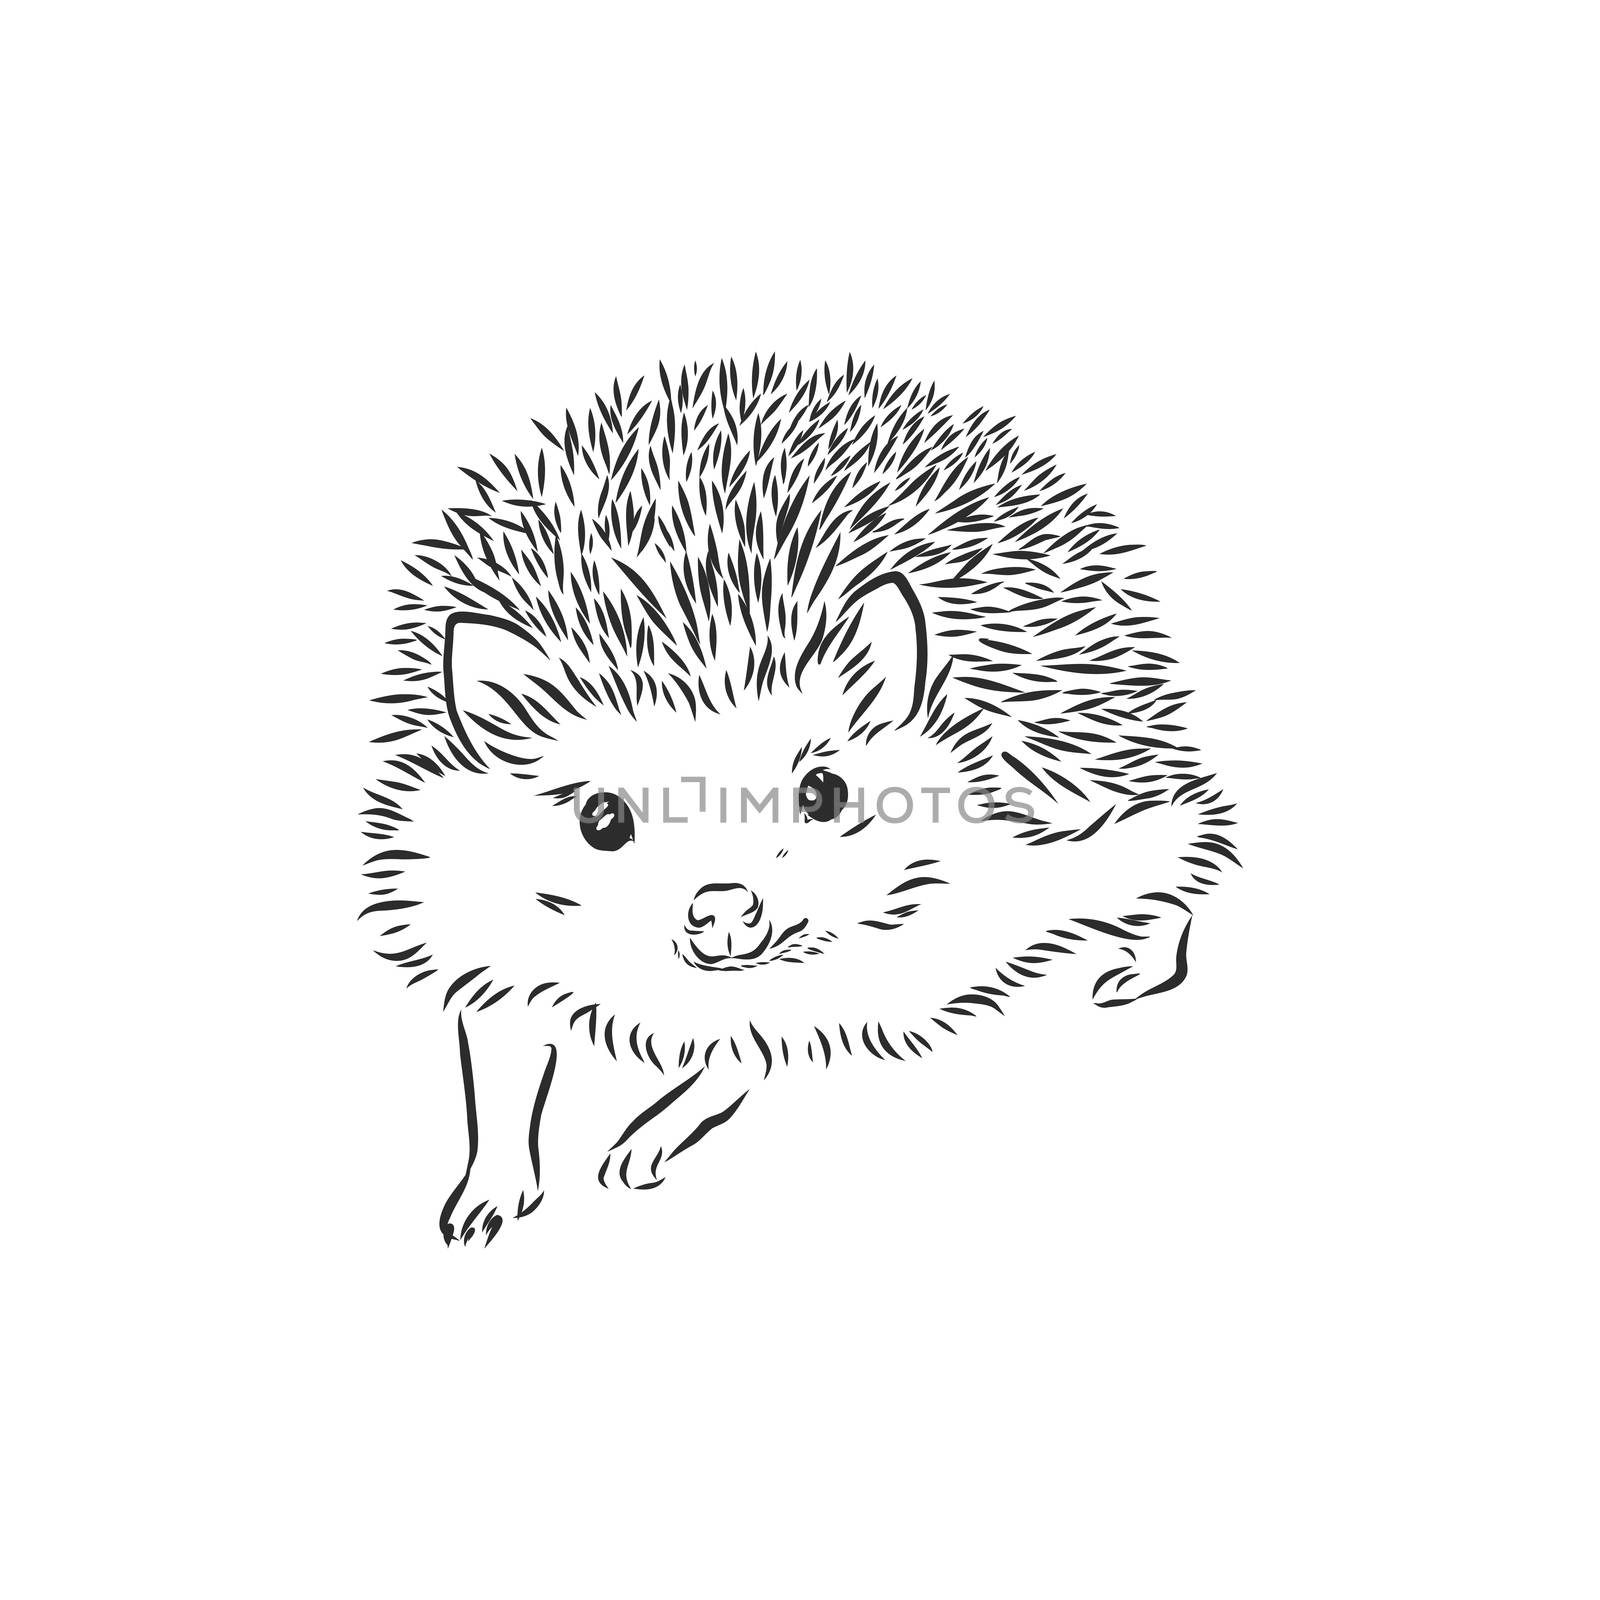 Hedgehog sketch drawing isolated on white background